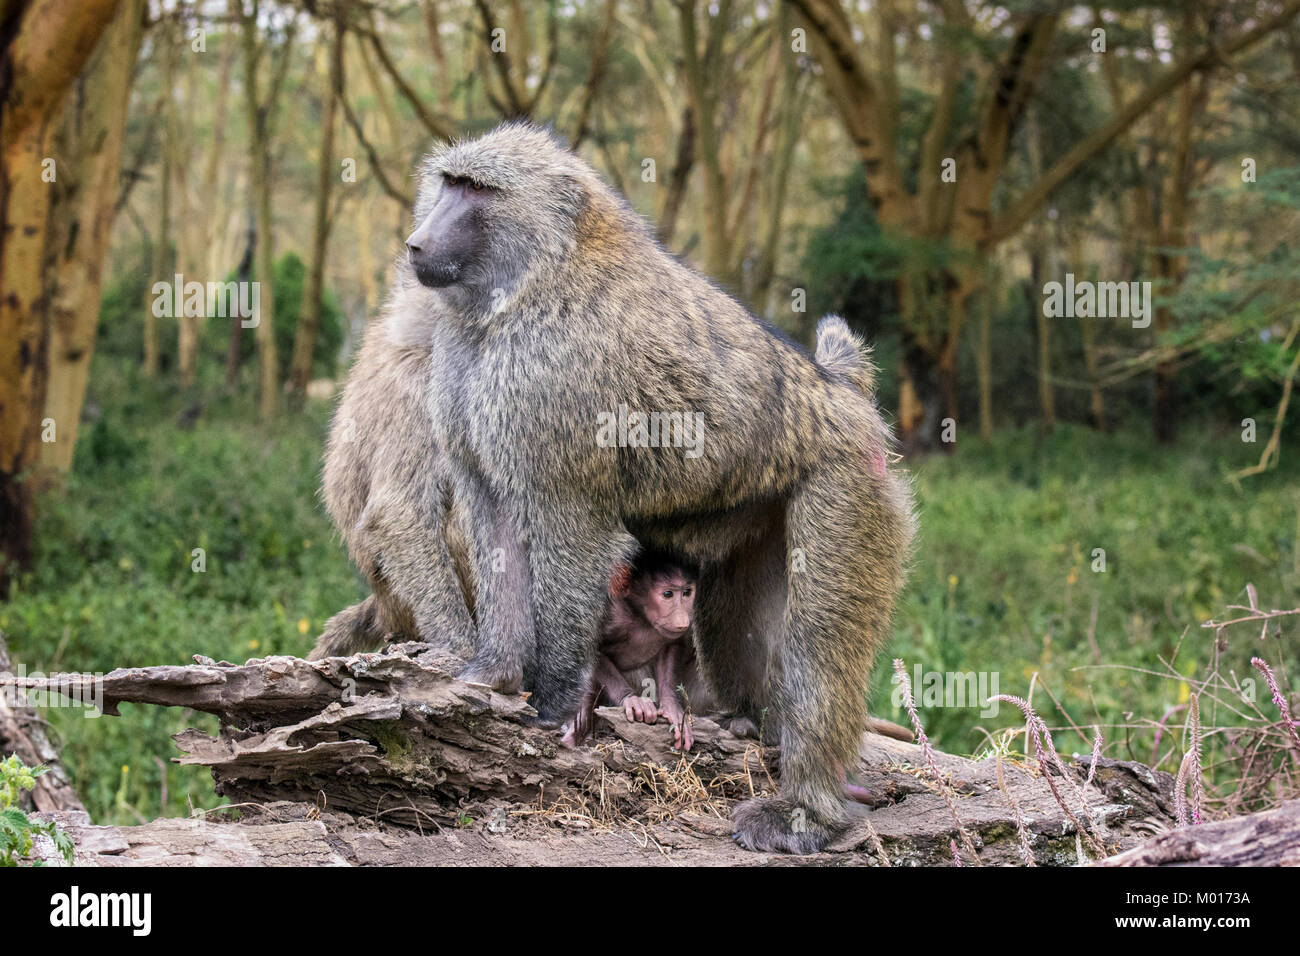 Tiny newborn Olive Baboon, Papio anubis, peeks out from under his mother, Nakuru National Park, Kenya, East Africa Stock Photo